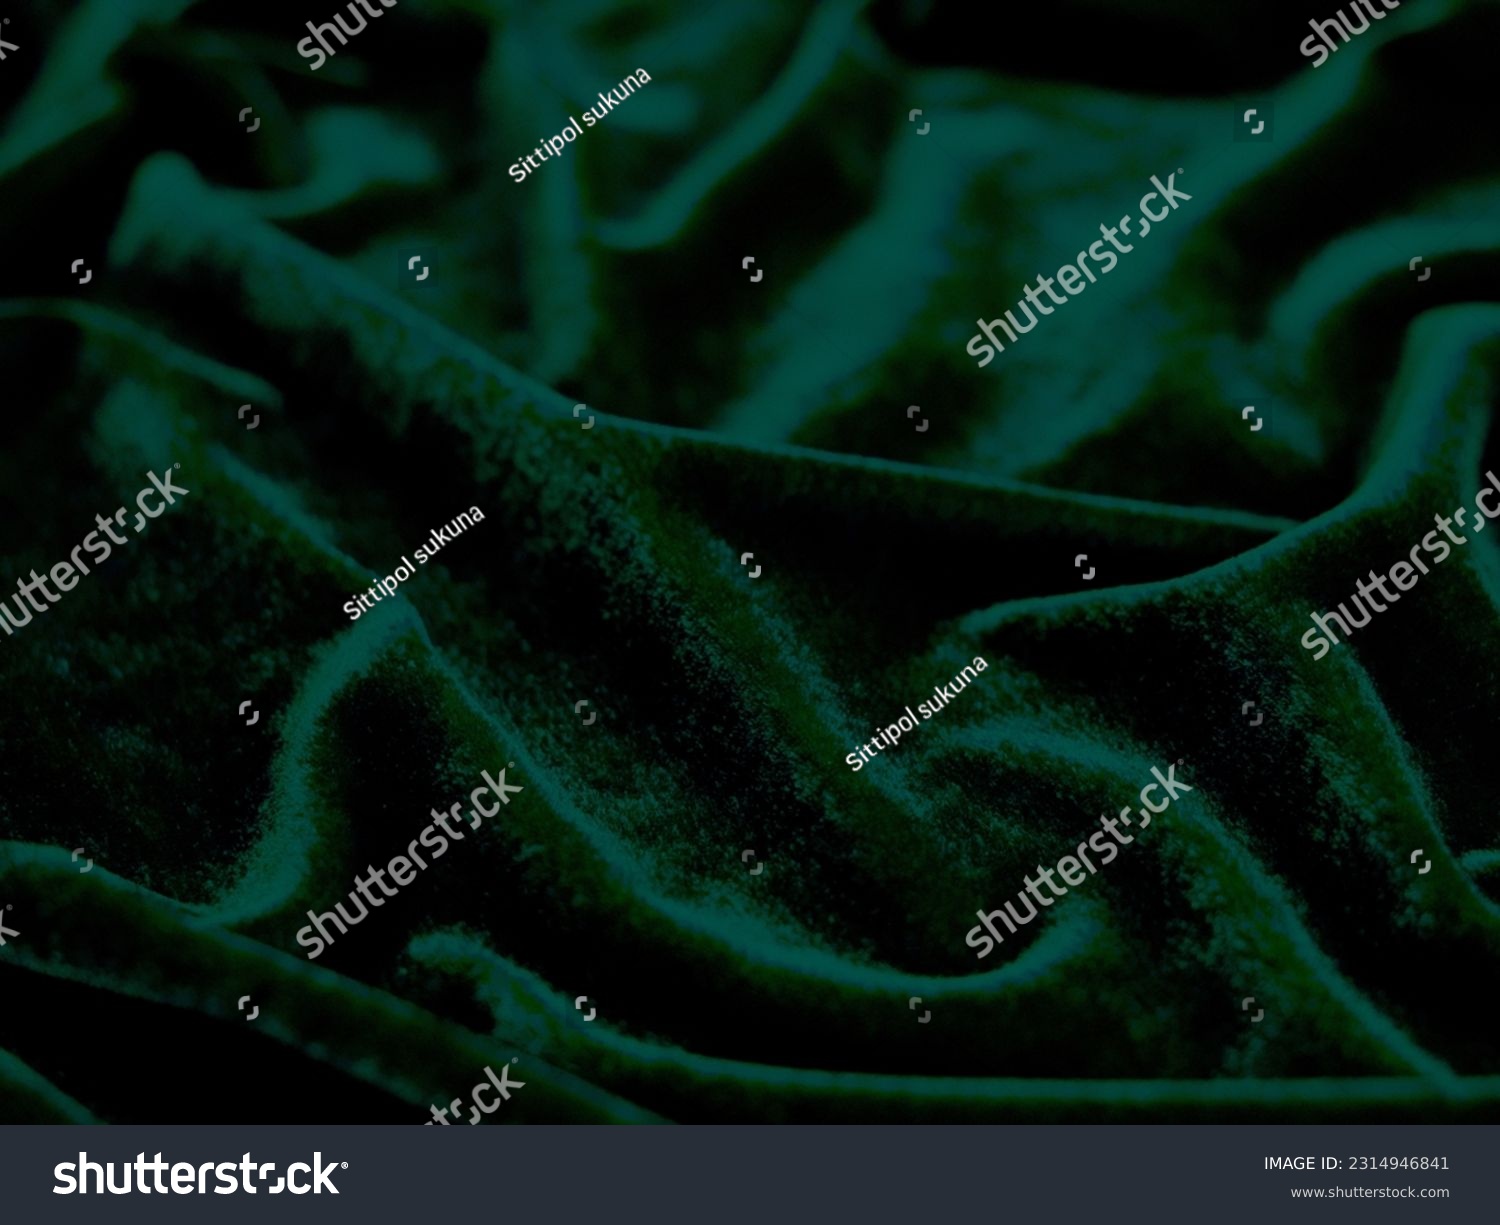 Green velvet fabric texture used as background. Empty green fabric background of soft and smooth textile material. There is space for text.	 #2314946841